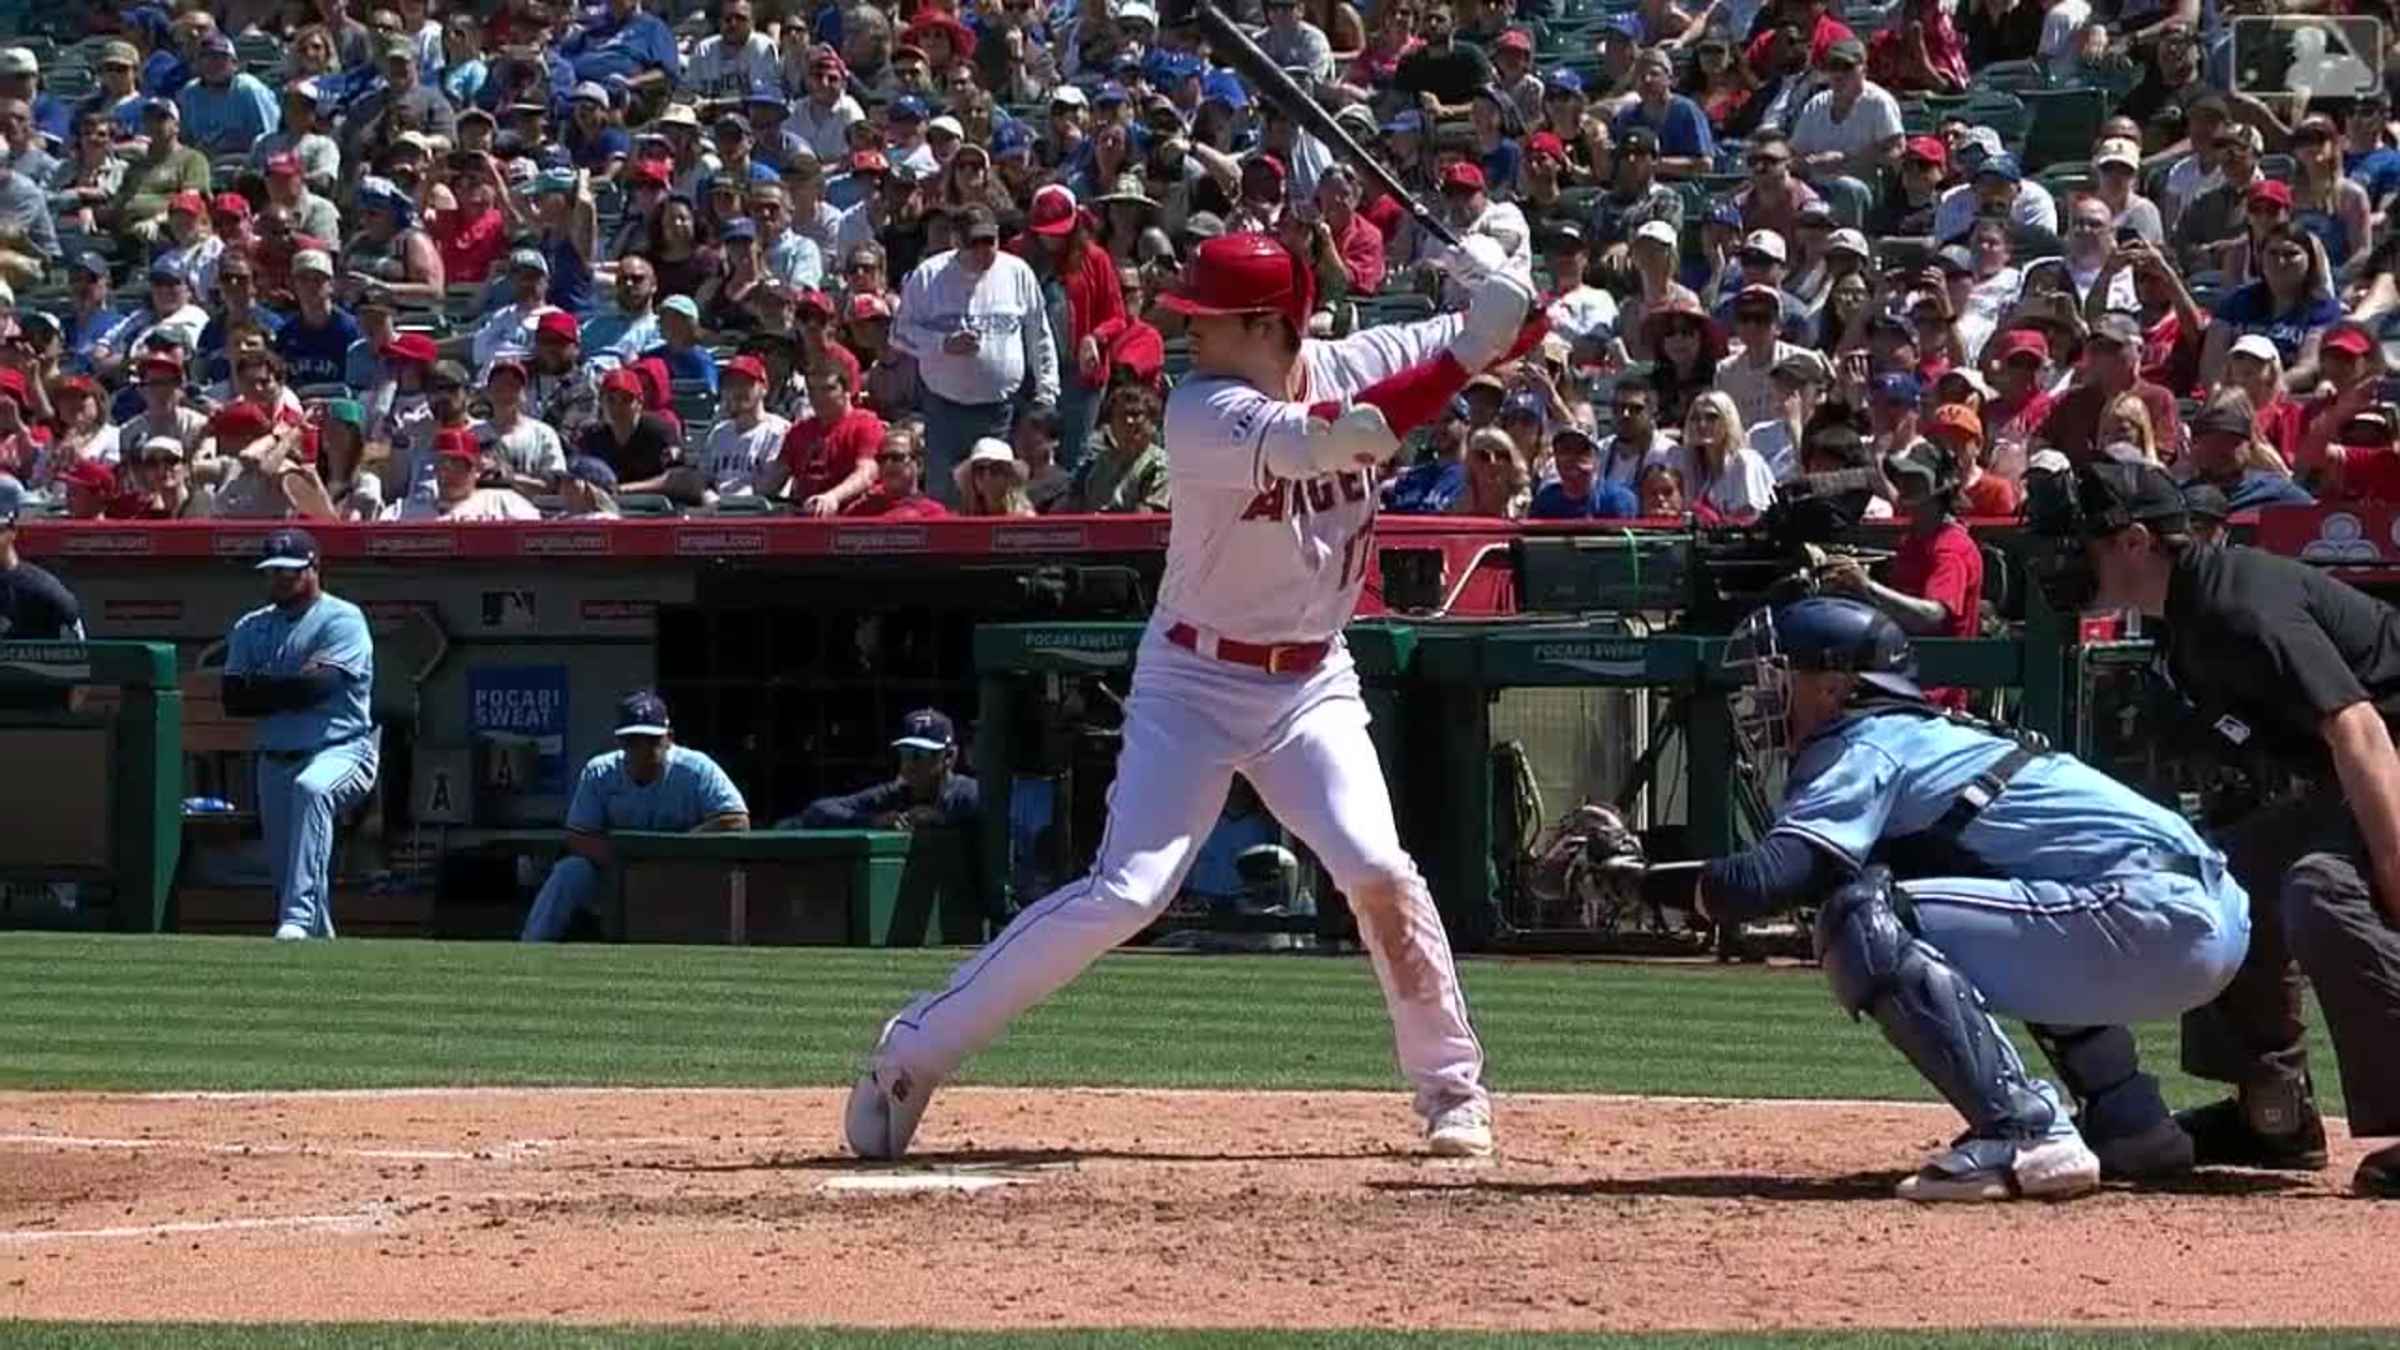 Ohtani homers in 3 straight at-bats over 2 games before being